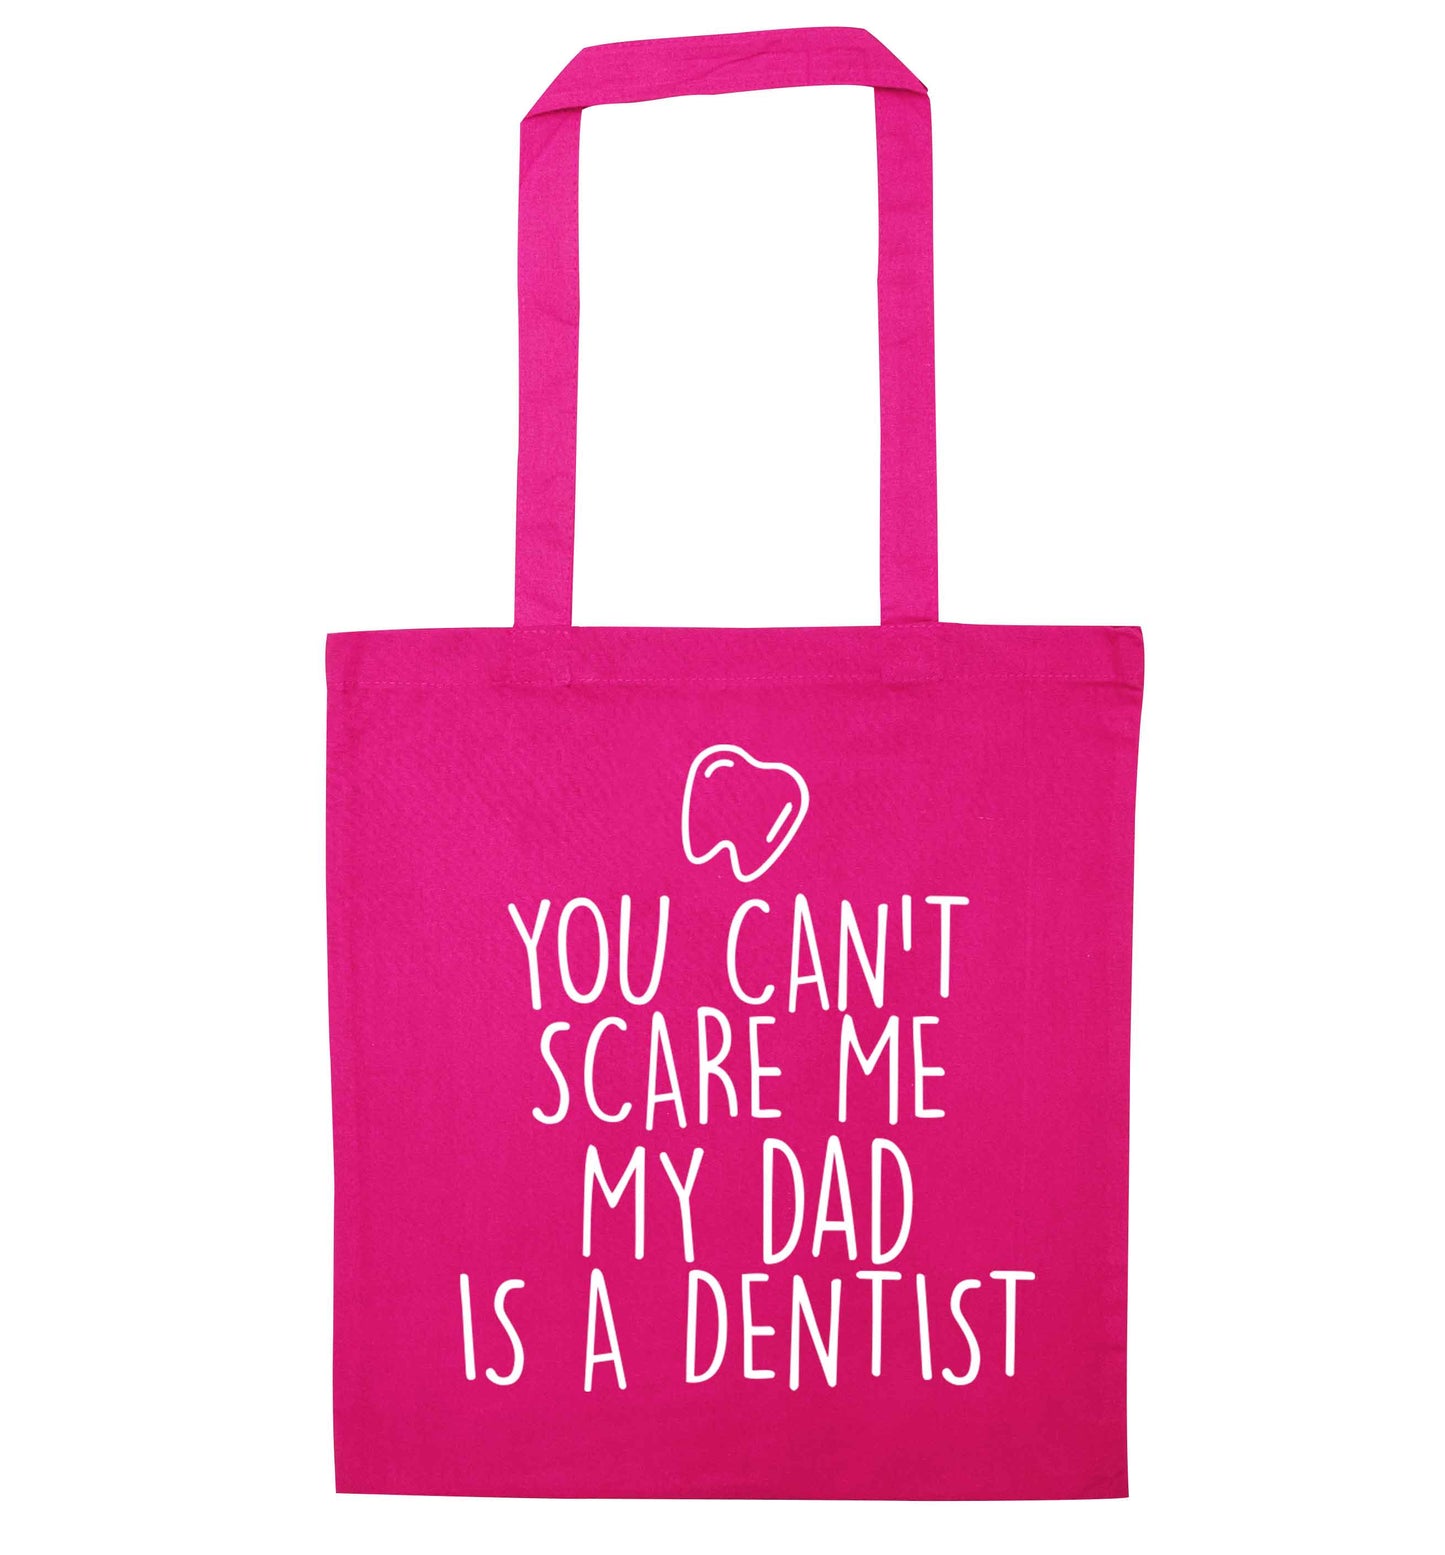 You can't scare me my dad is a dentist pink tote bag